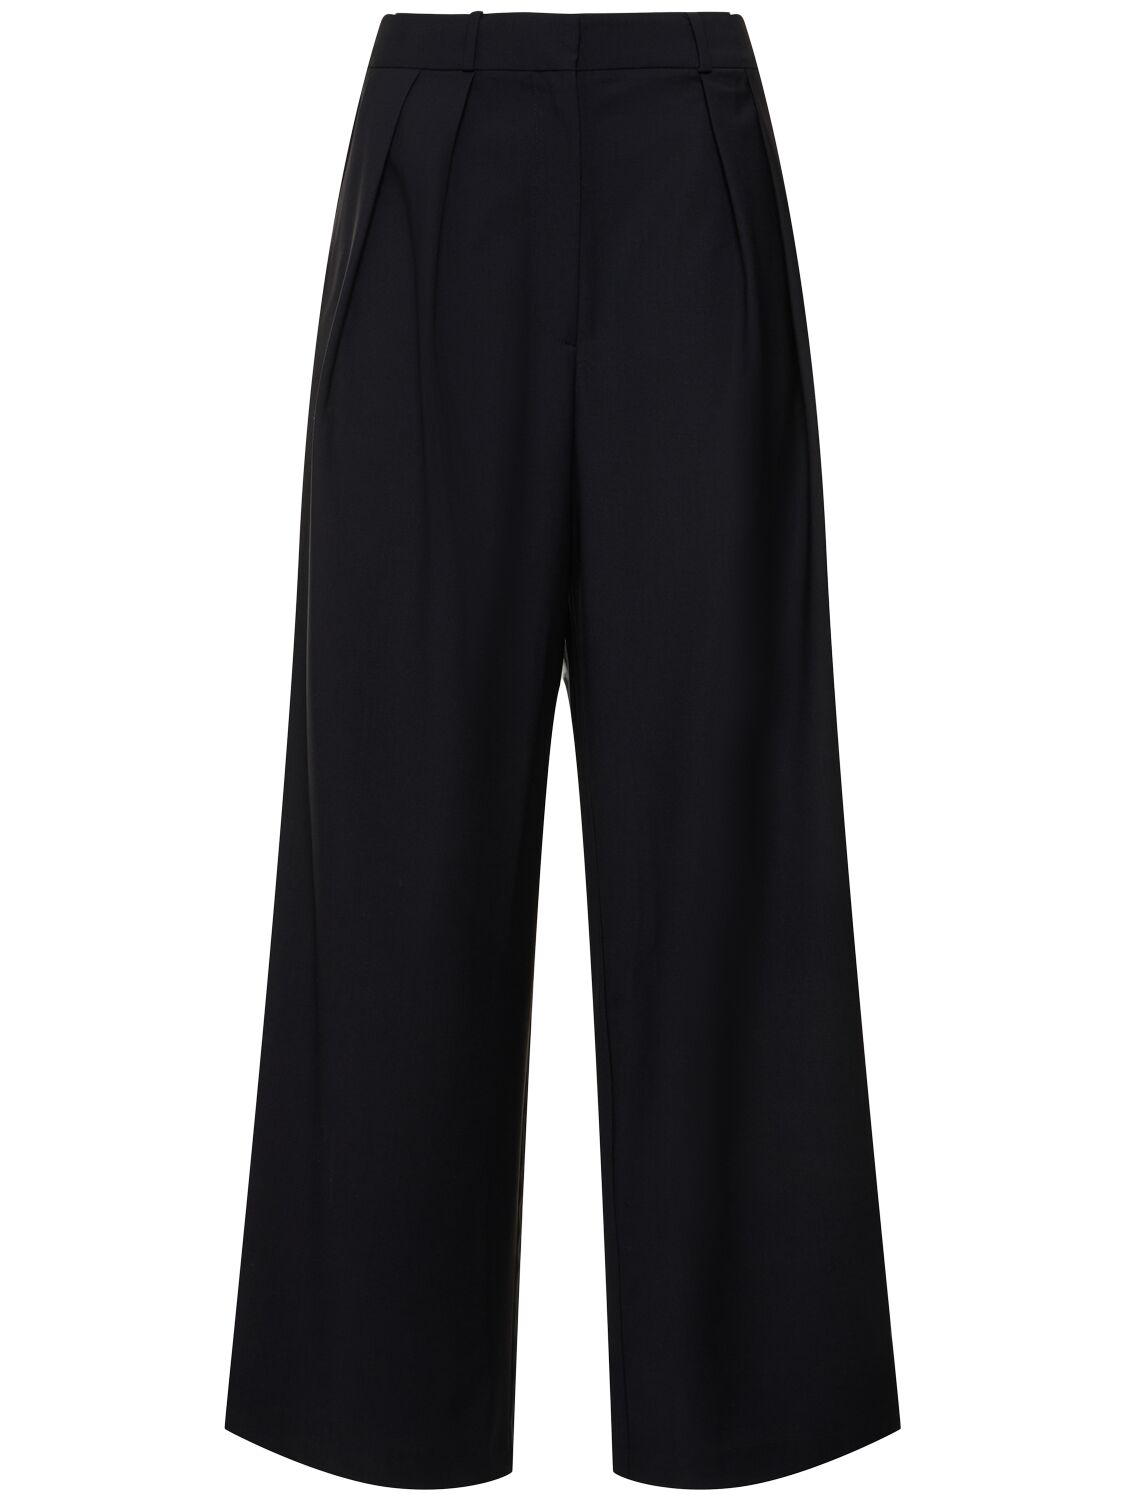 THE FRANKIE SHOP RIPLEY PLEATED VISCOSE BLEND PANTS